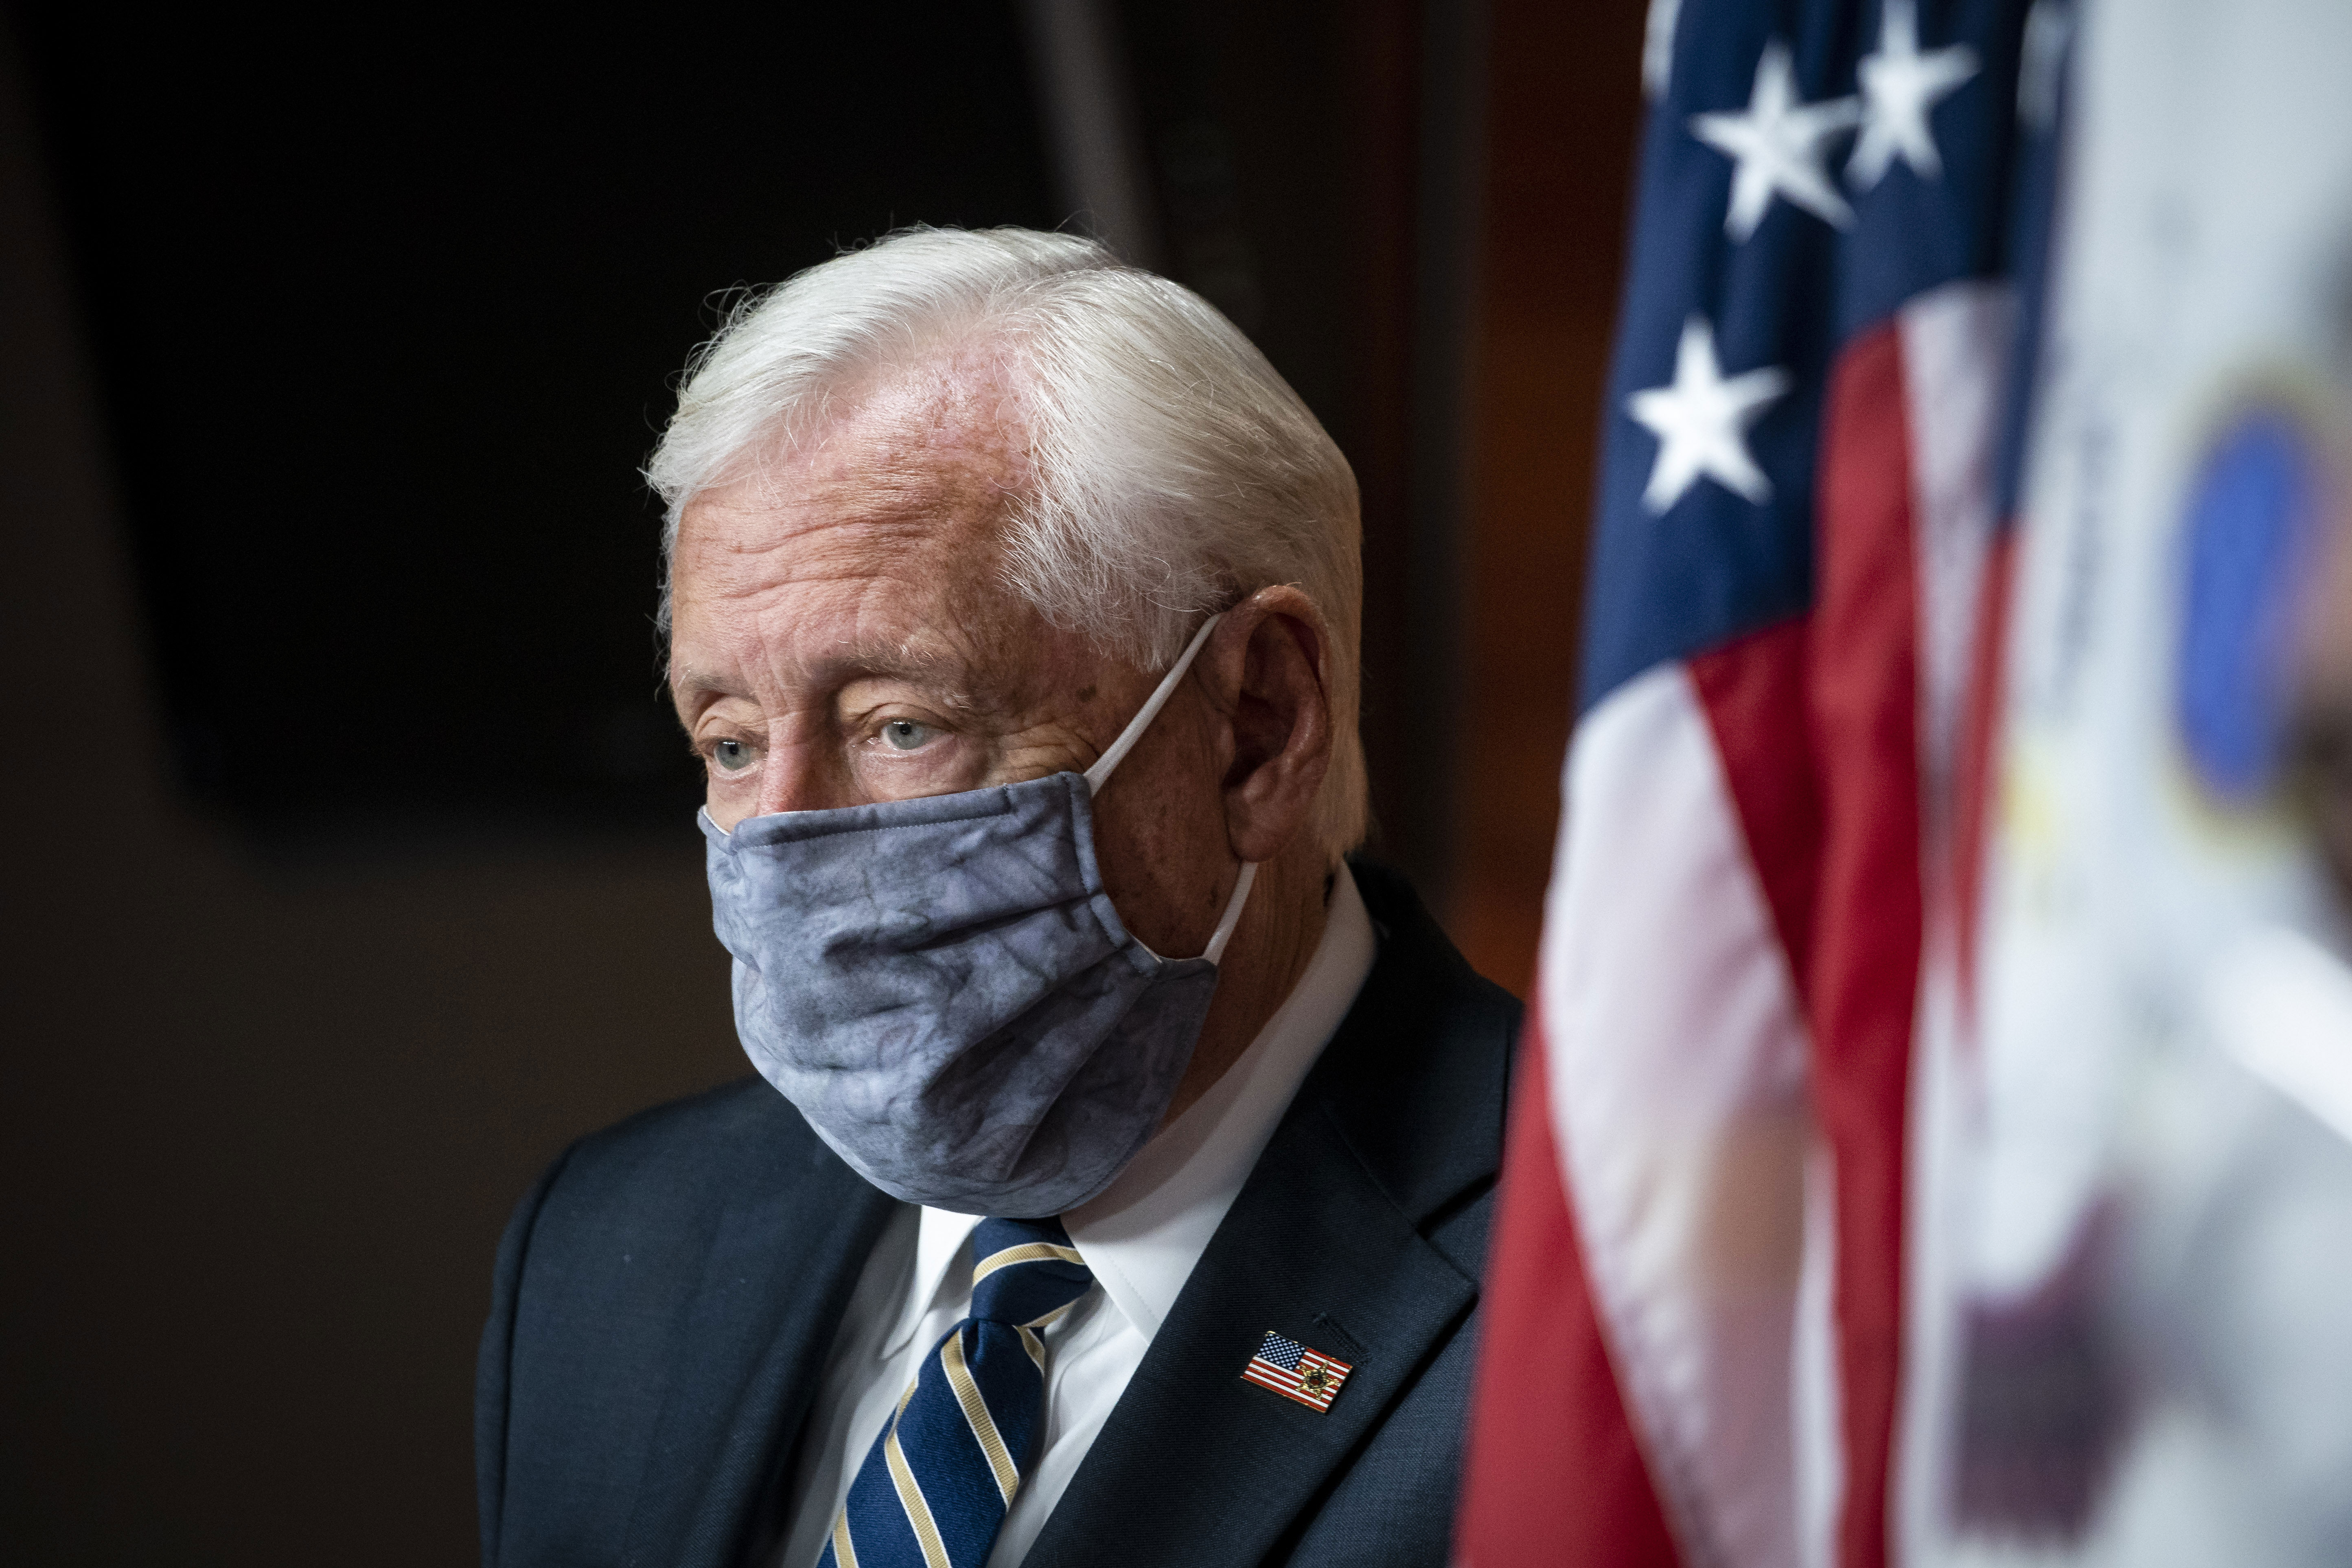 Steny Hoyer, House majority leader, attends a news conference on July 22 in Washington, DC.